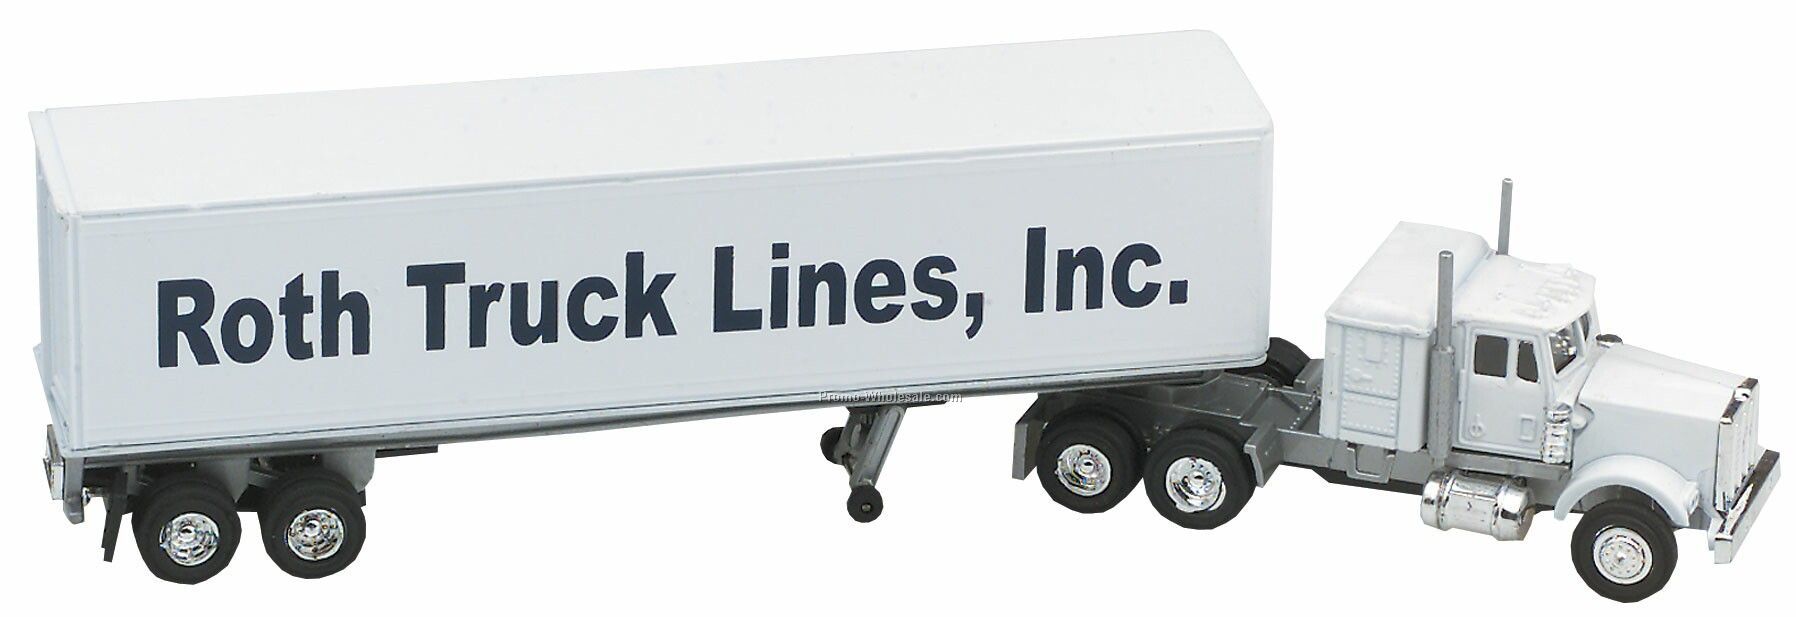 12" Die Cast Conventional Sleeper Truck With Trailer & Decal